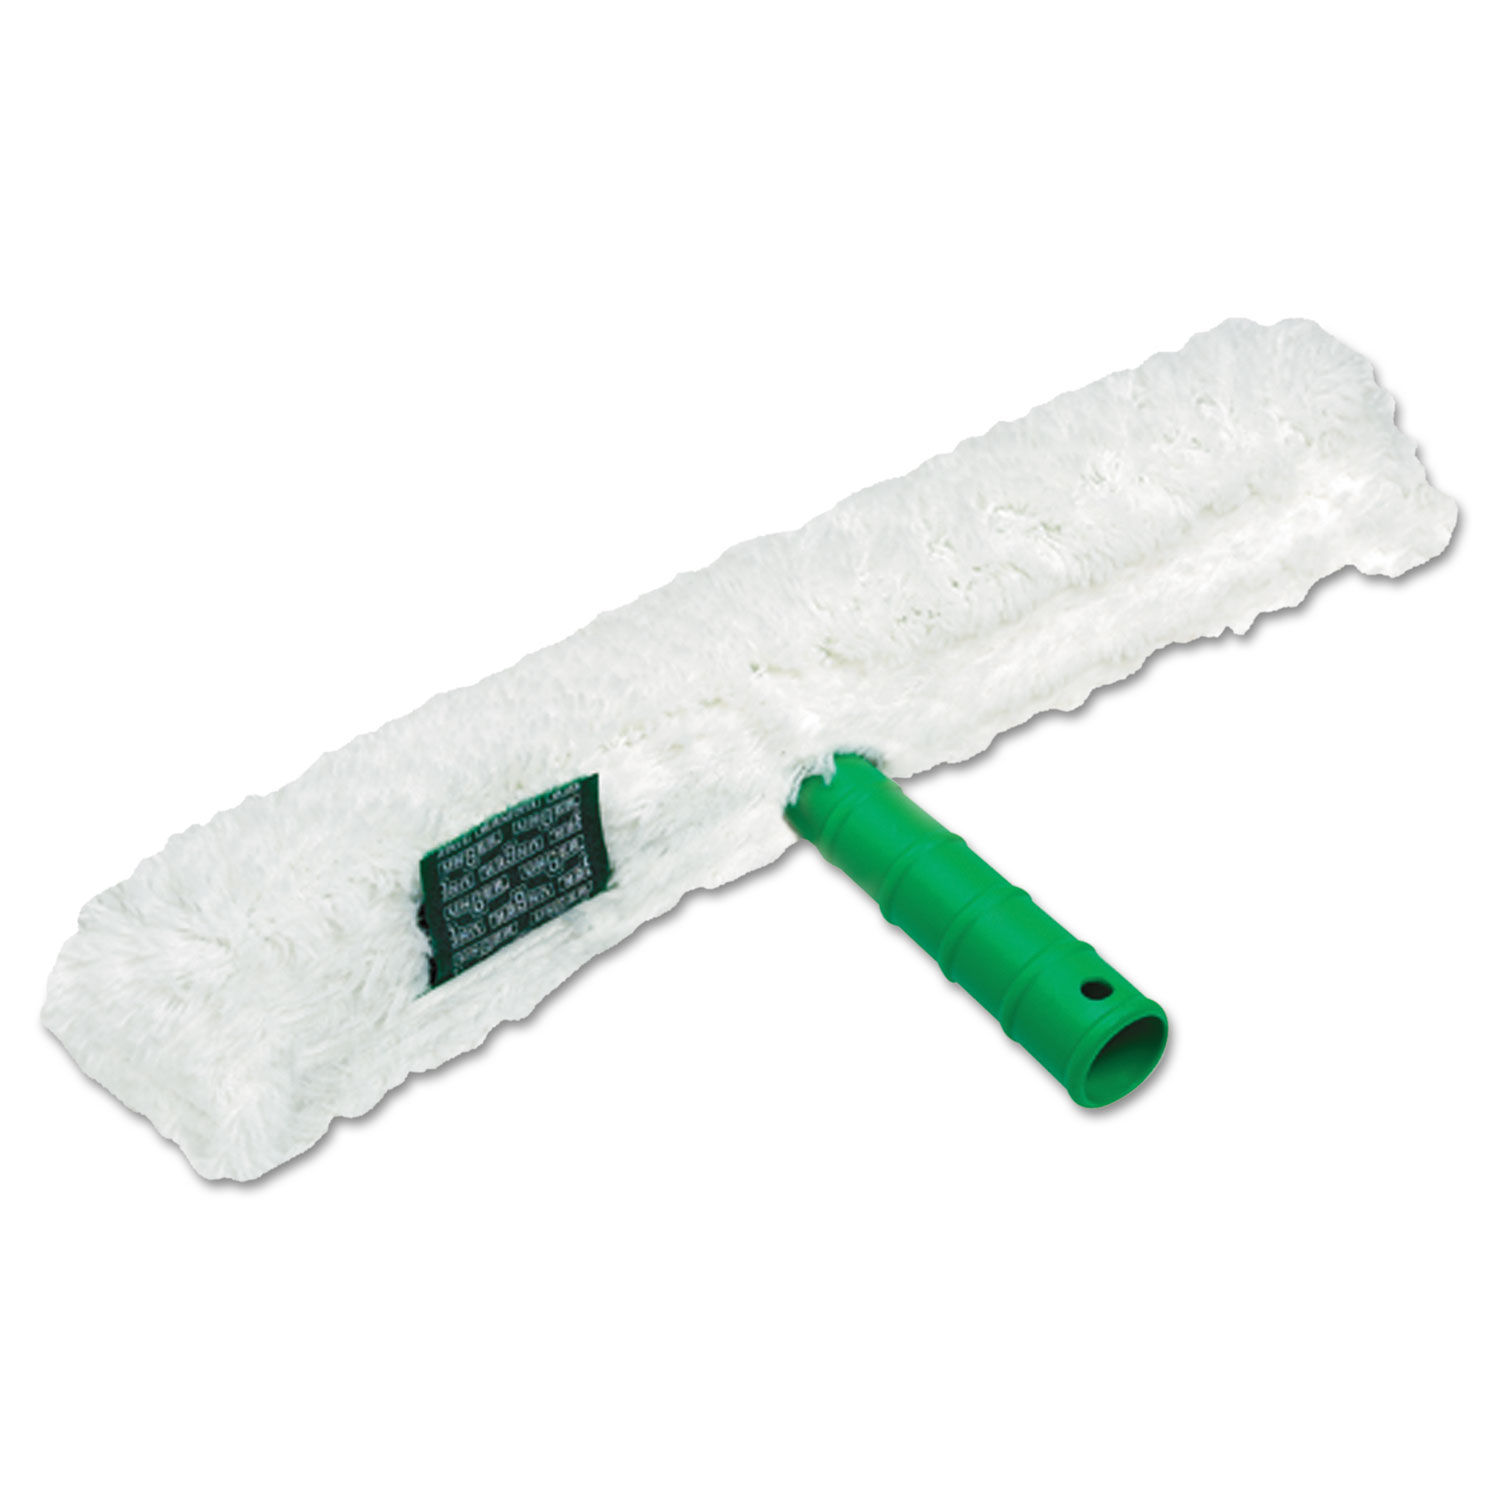 Original Strip Washer with Green Nylon Handle White Cloth Sleeve, 18" Wide Blade